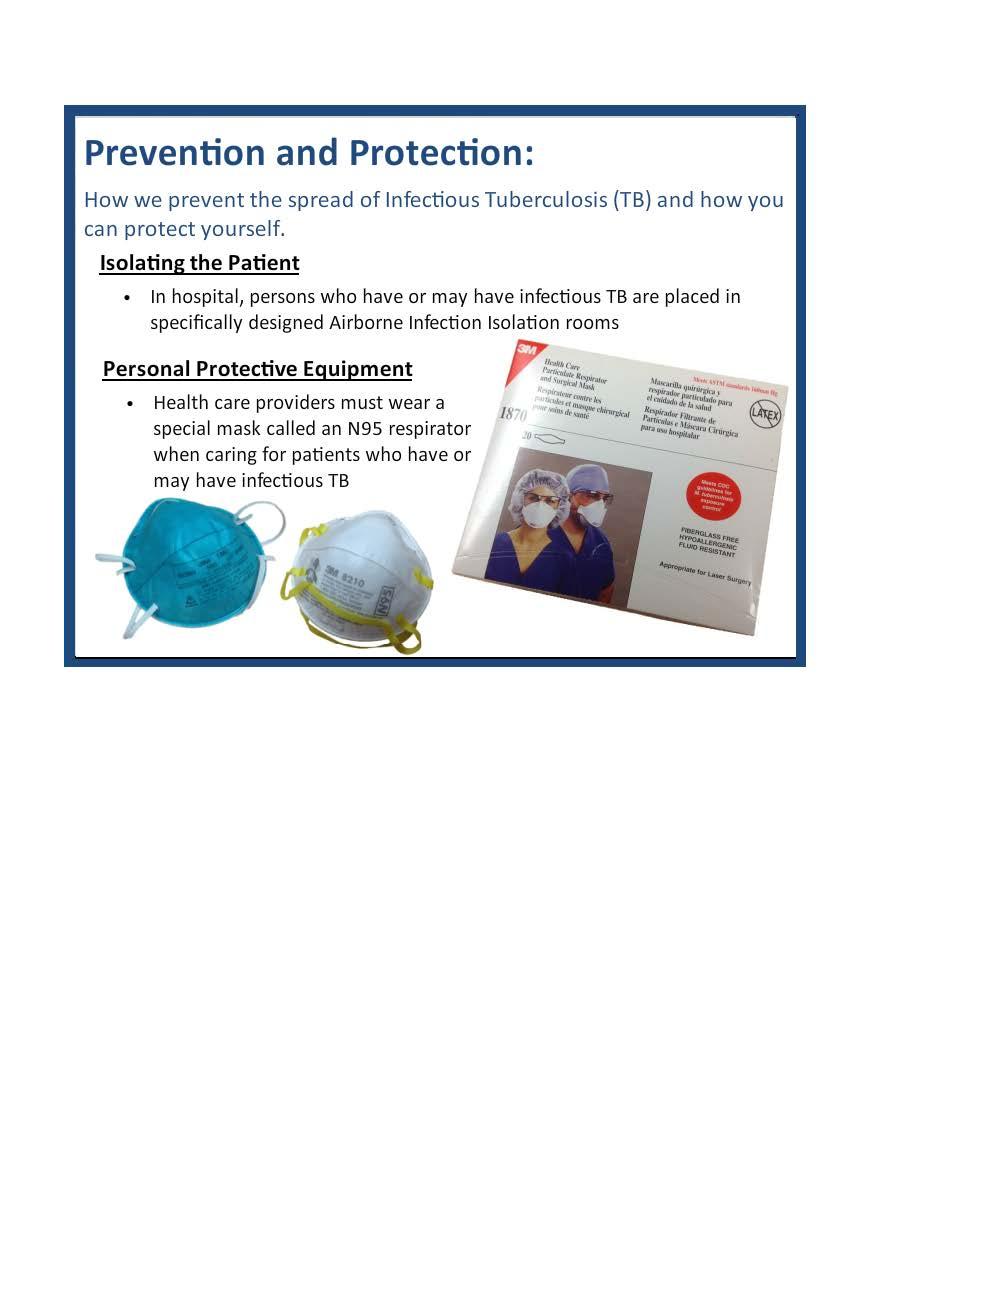 Prevention and Protection: How we prevent the spread of Infectious Tubercu losis (TB) and how you can protect yourself.